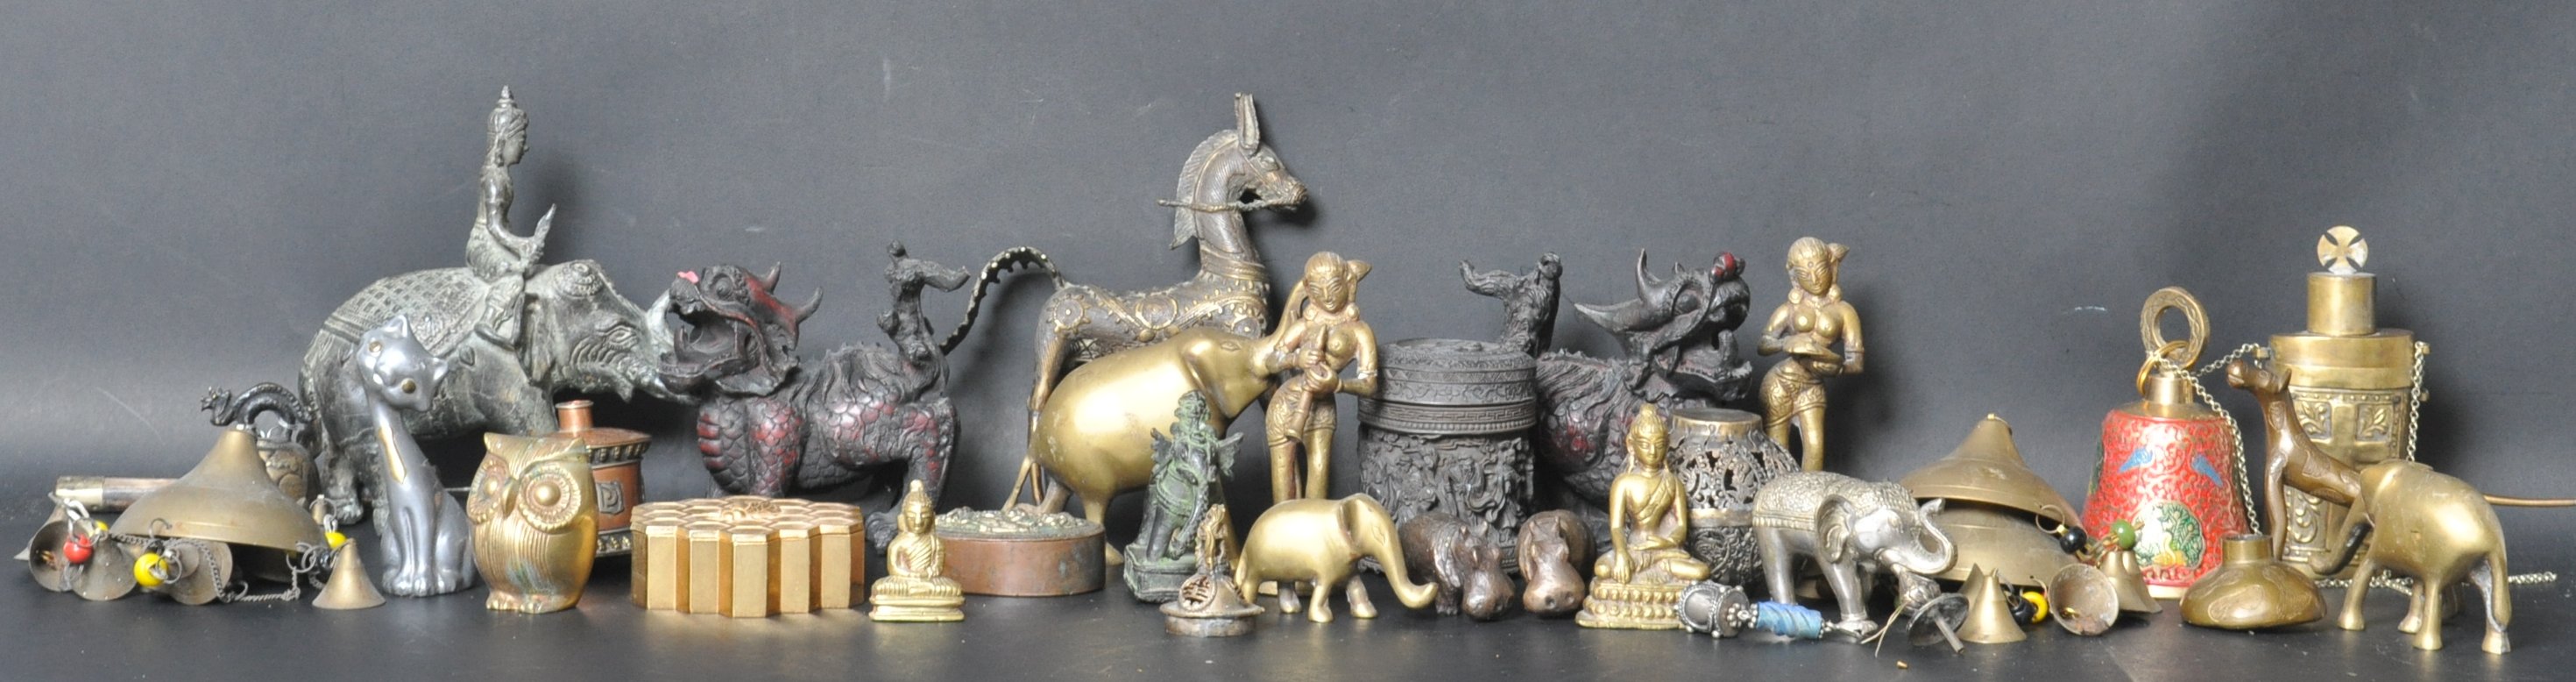 LARGE COLLECTION OF BRASS WARE AND HINDU FIGURINES